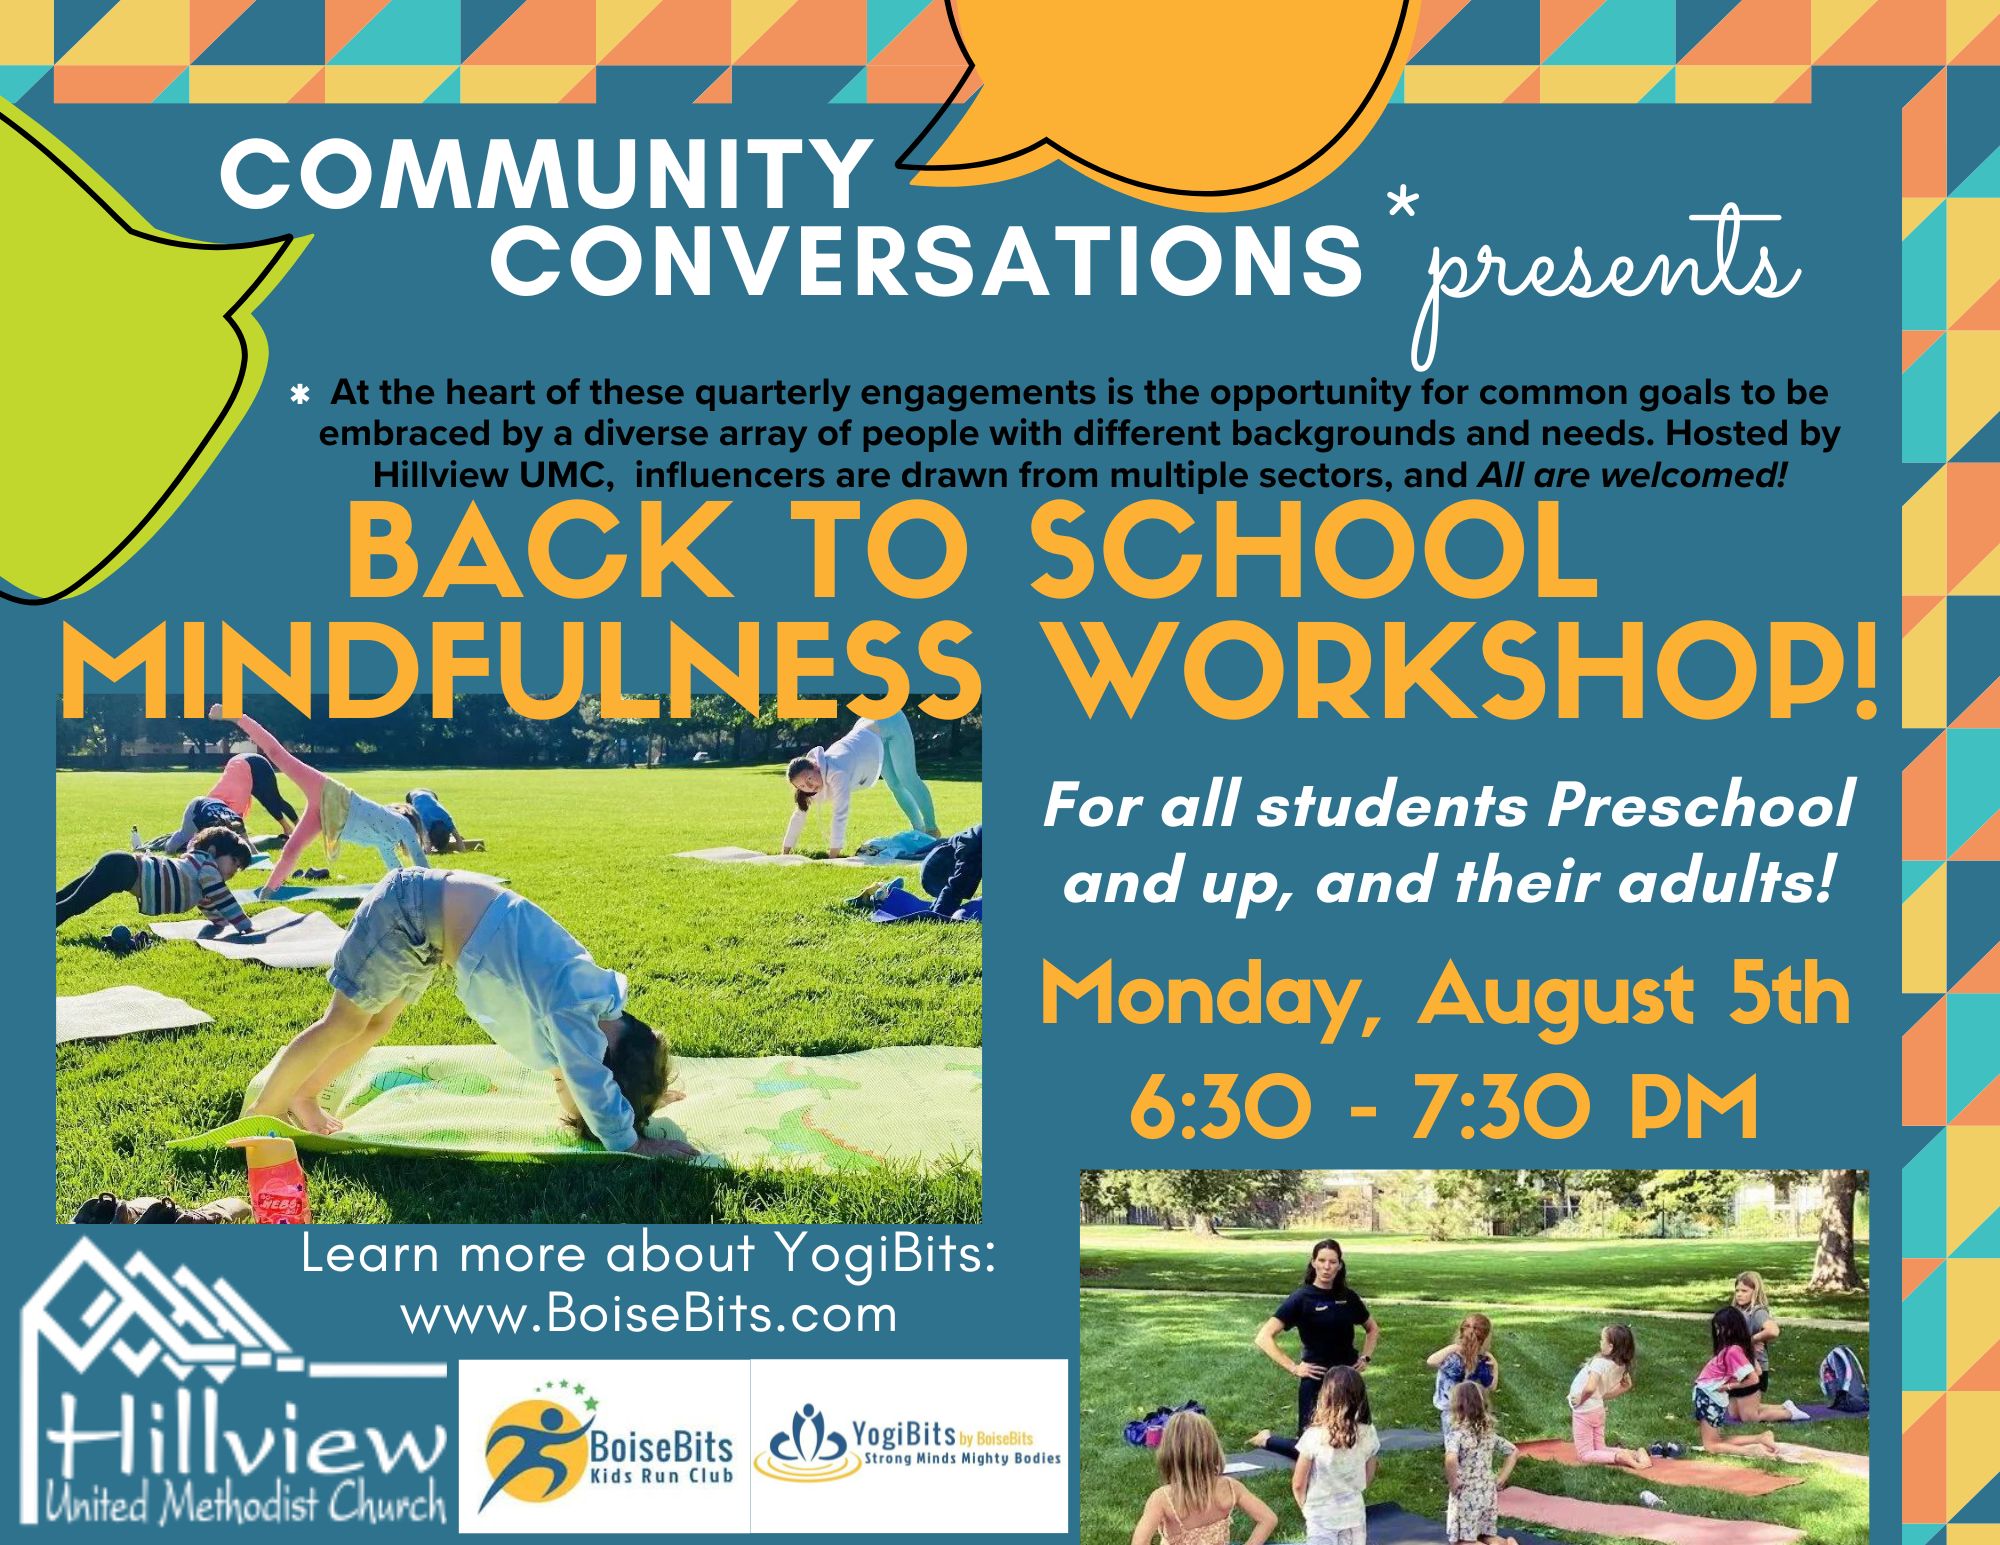 Back to School Mindfulness Workshop! Monday, August 5th, 6:30 to 7:30 pm.